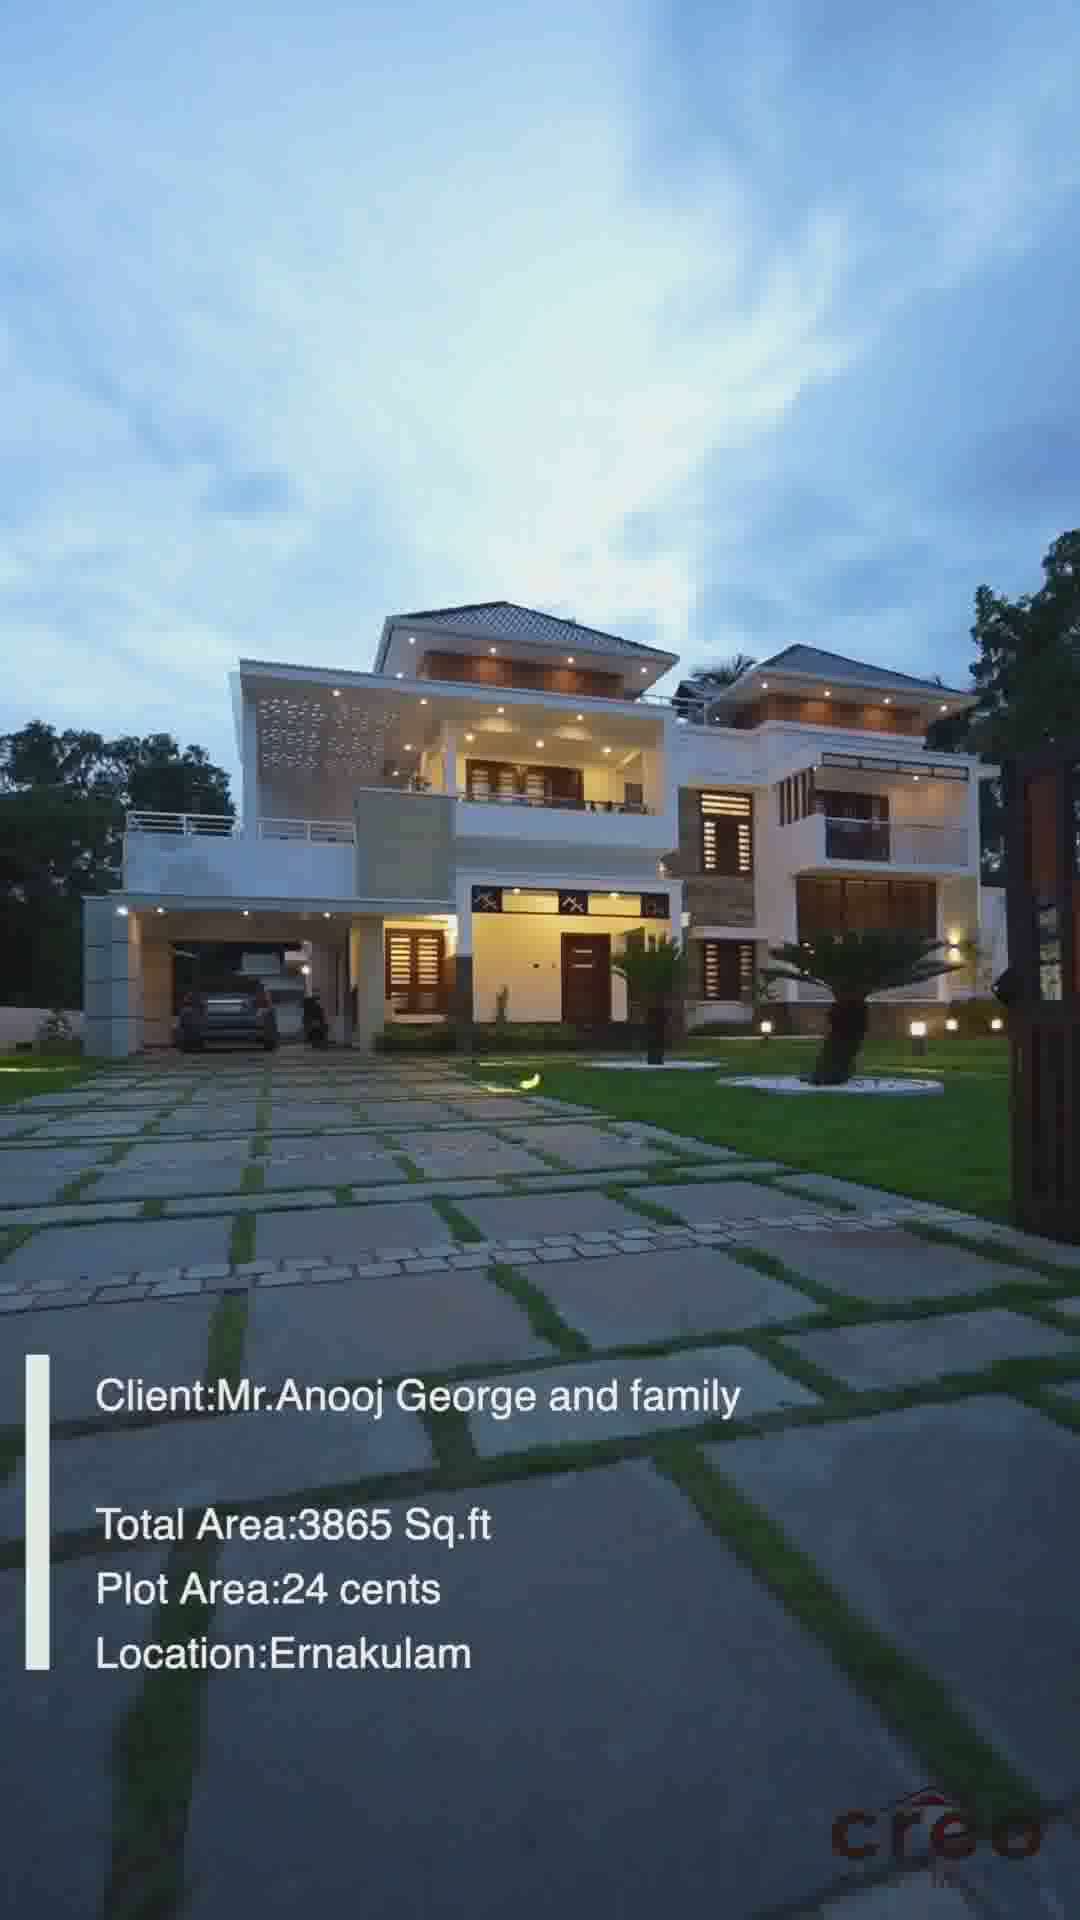 Client: Mr Anoop George and family

Area: 3865 Sq Ft
Plot: 24 Cents
Location: Ernakulam

Architect: Ginu M
Contact number: 9645899951
Firm name: Creo Homes Pvt. Ltd.
@creoarchitects
Architect: Sreerag Paramel